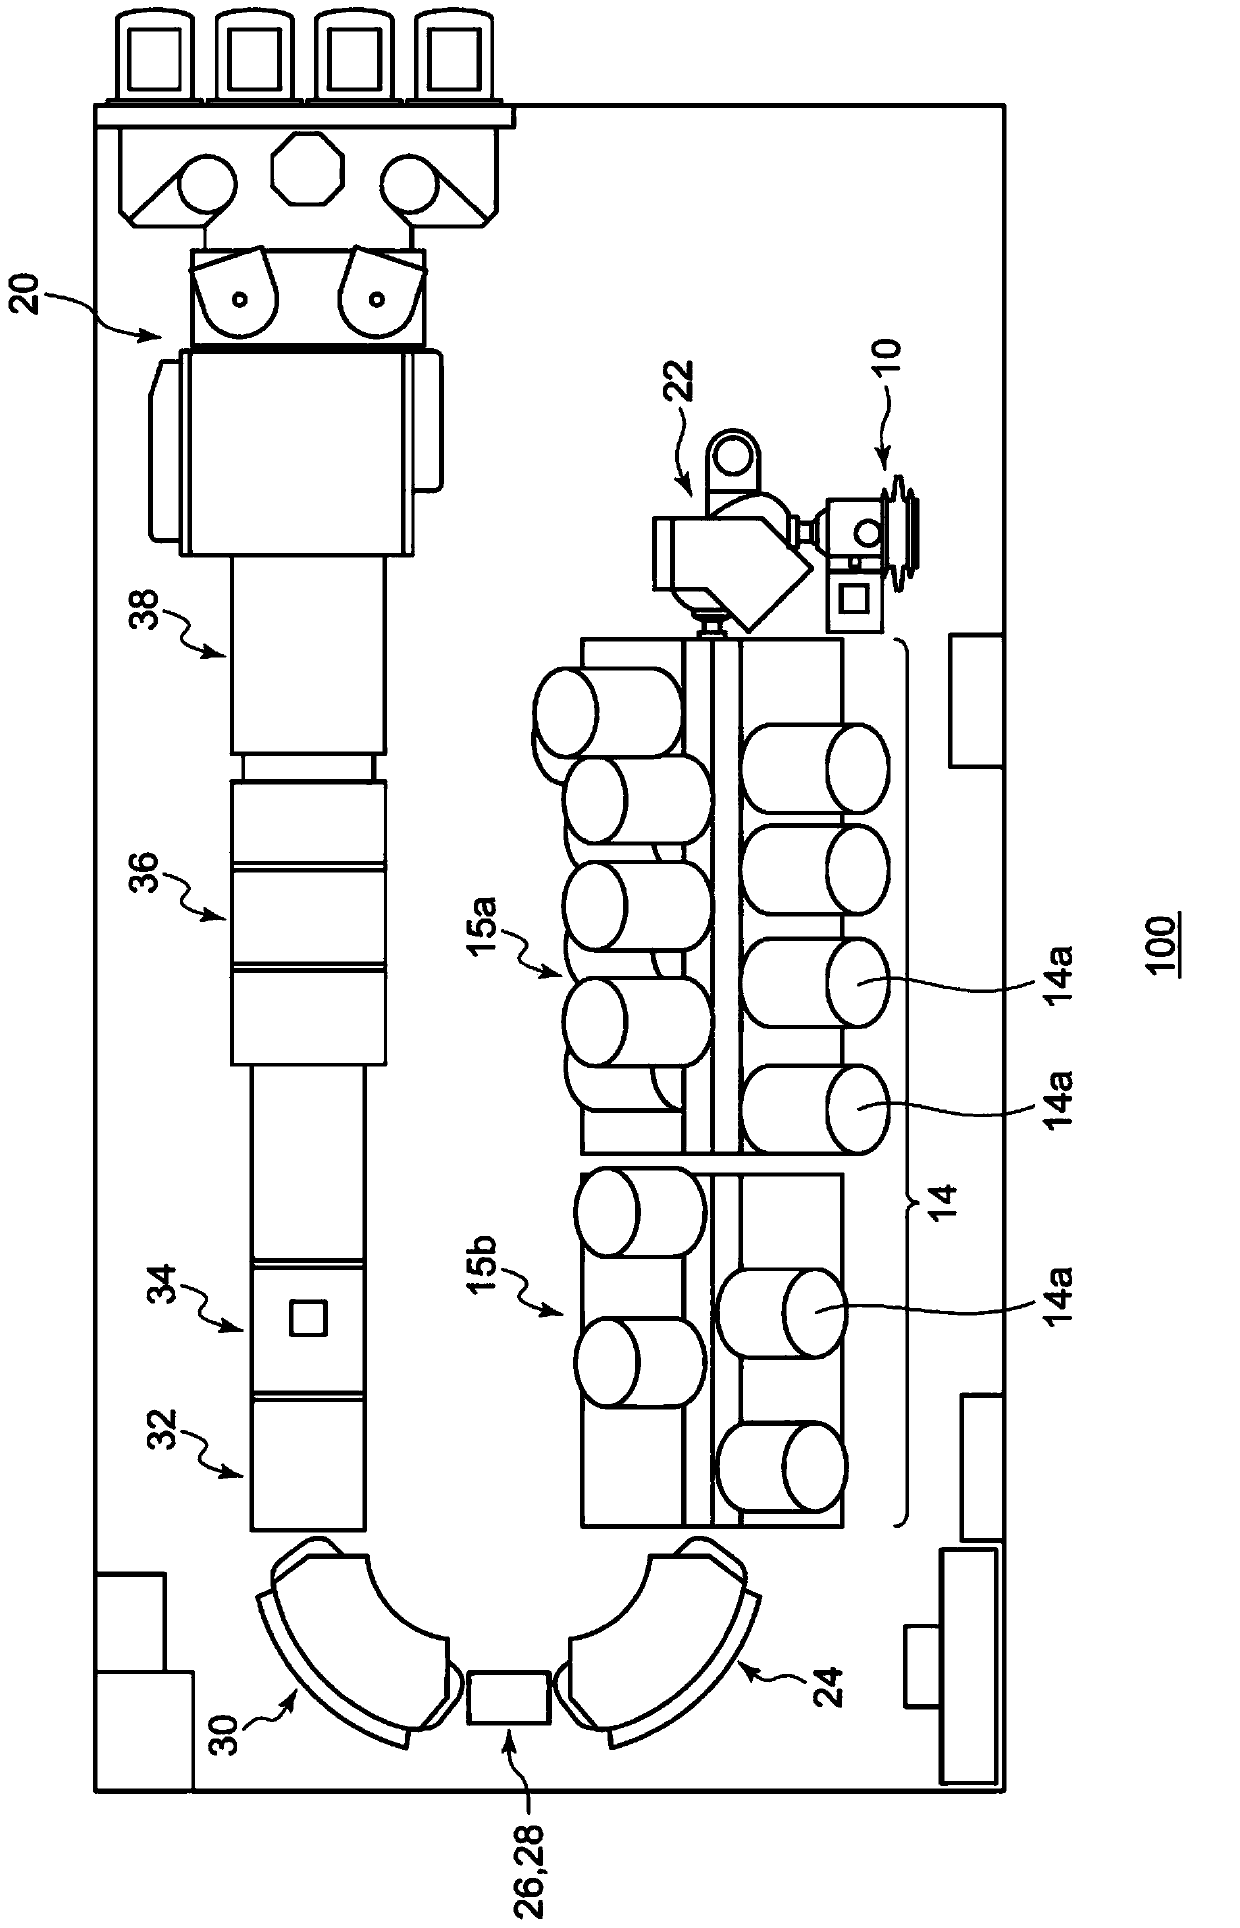 High-energy ion injection device